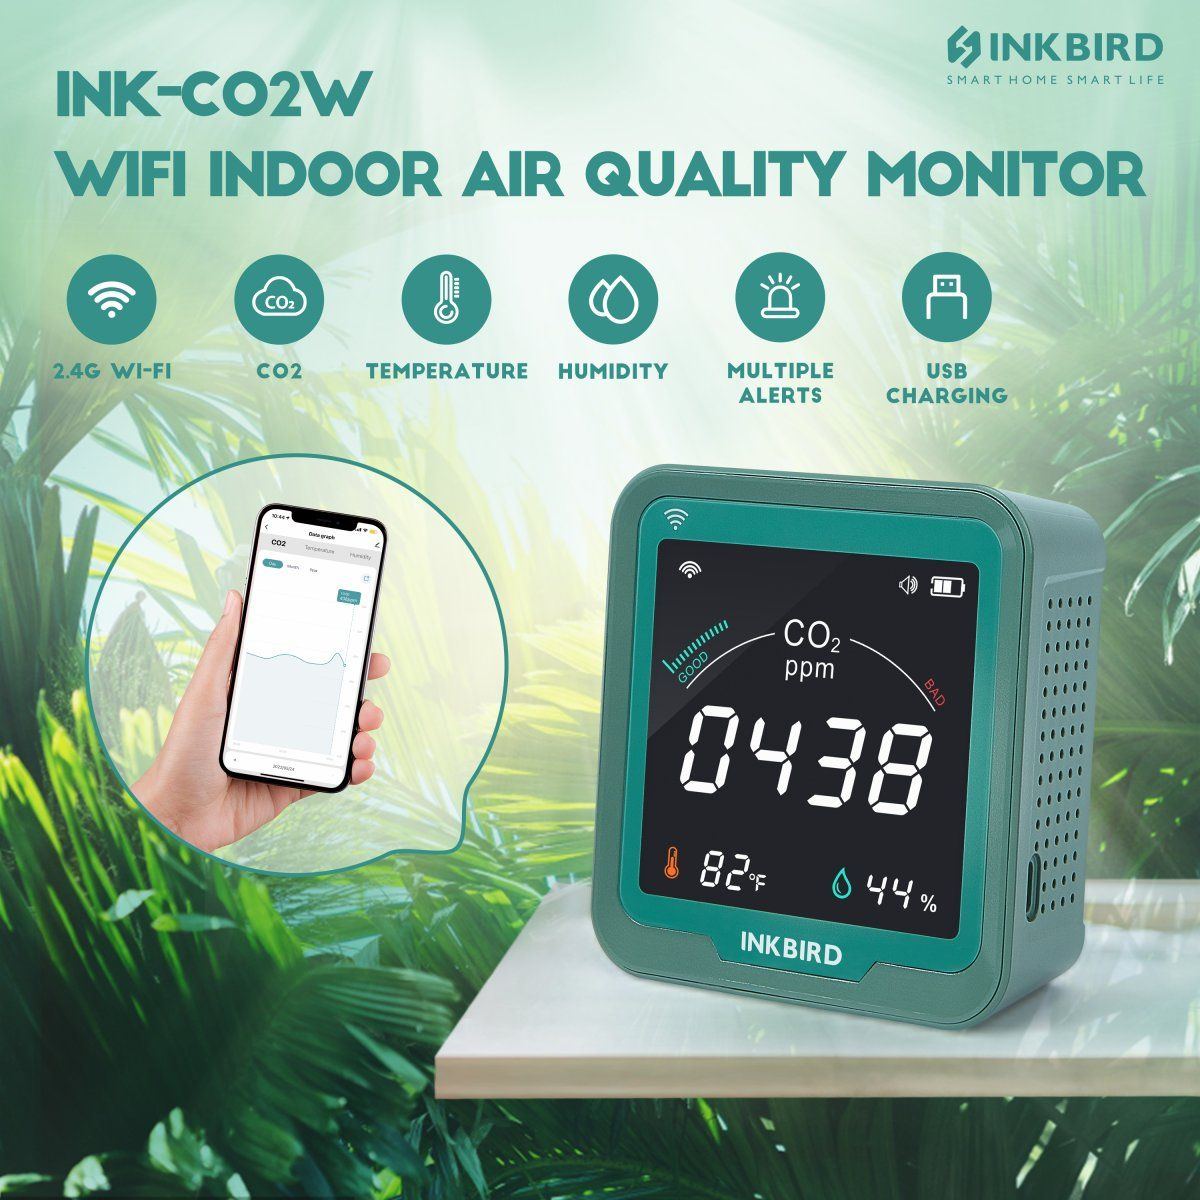 Free test for inkbird ink co2w wifi air quality monitor